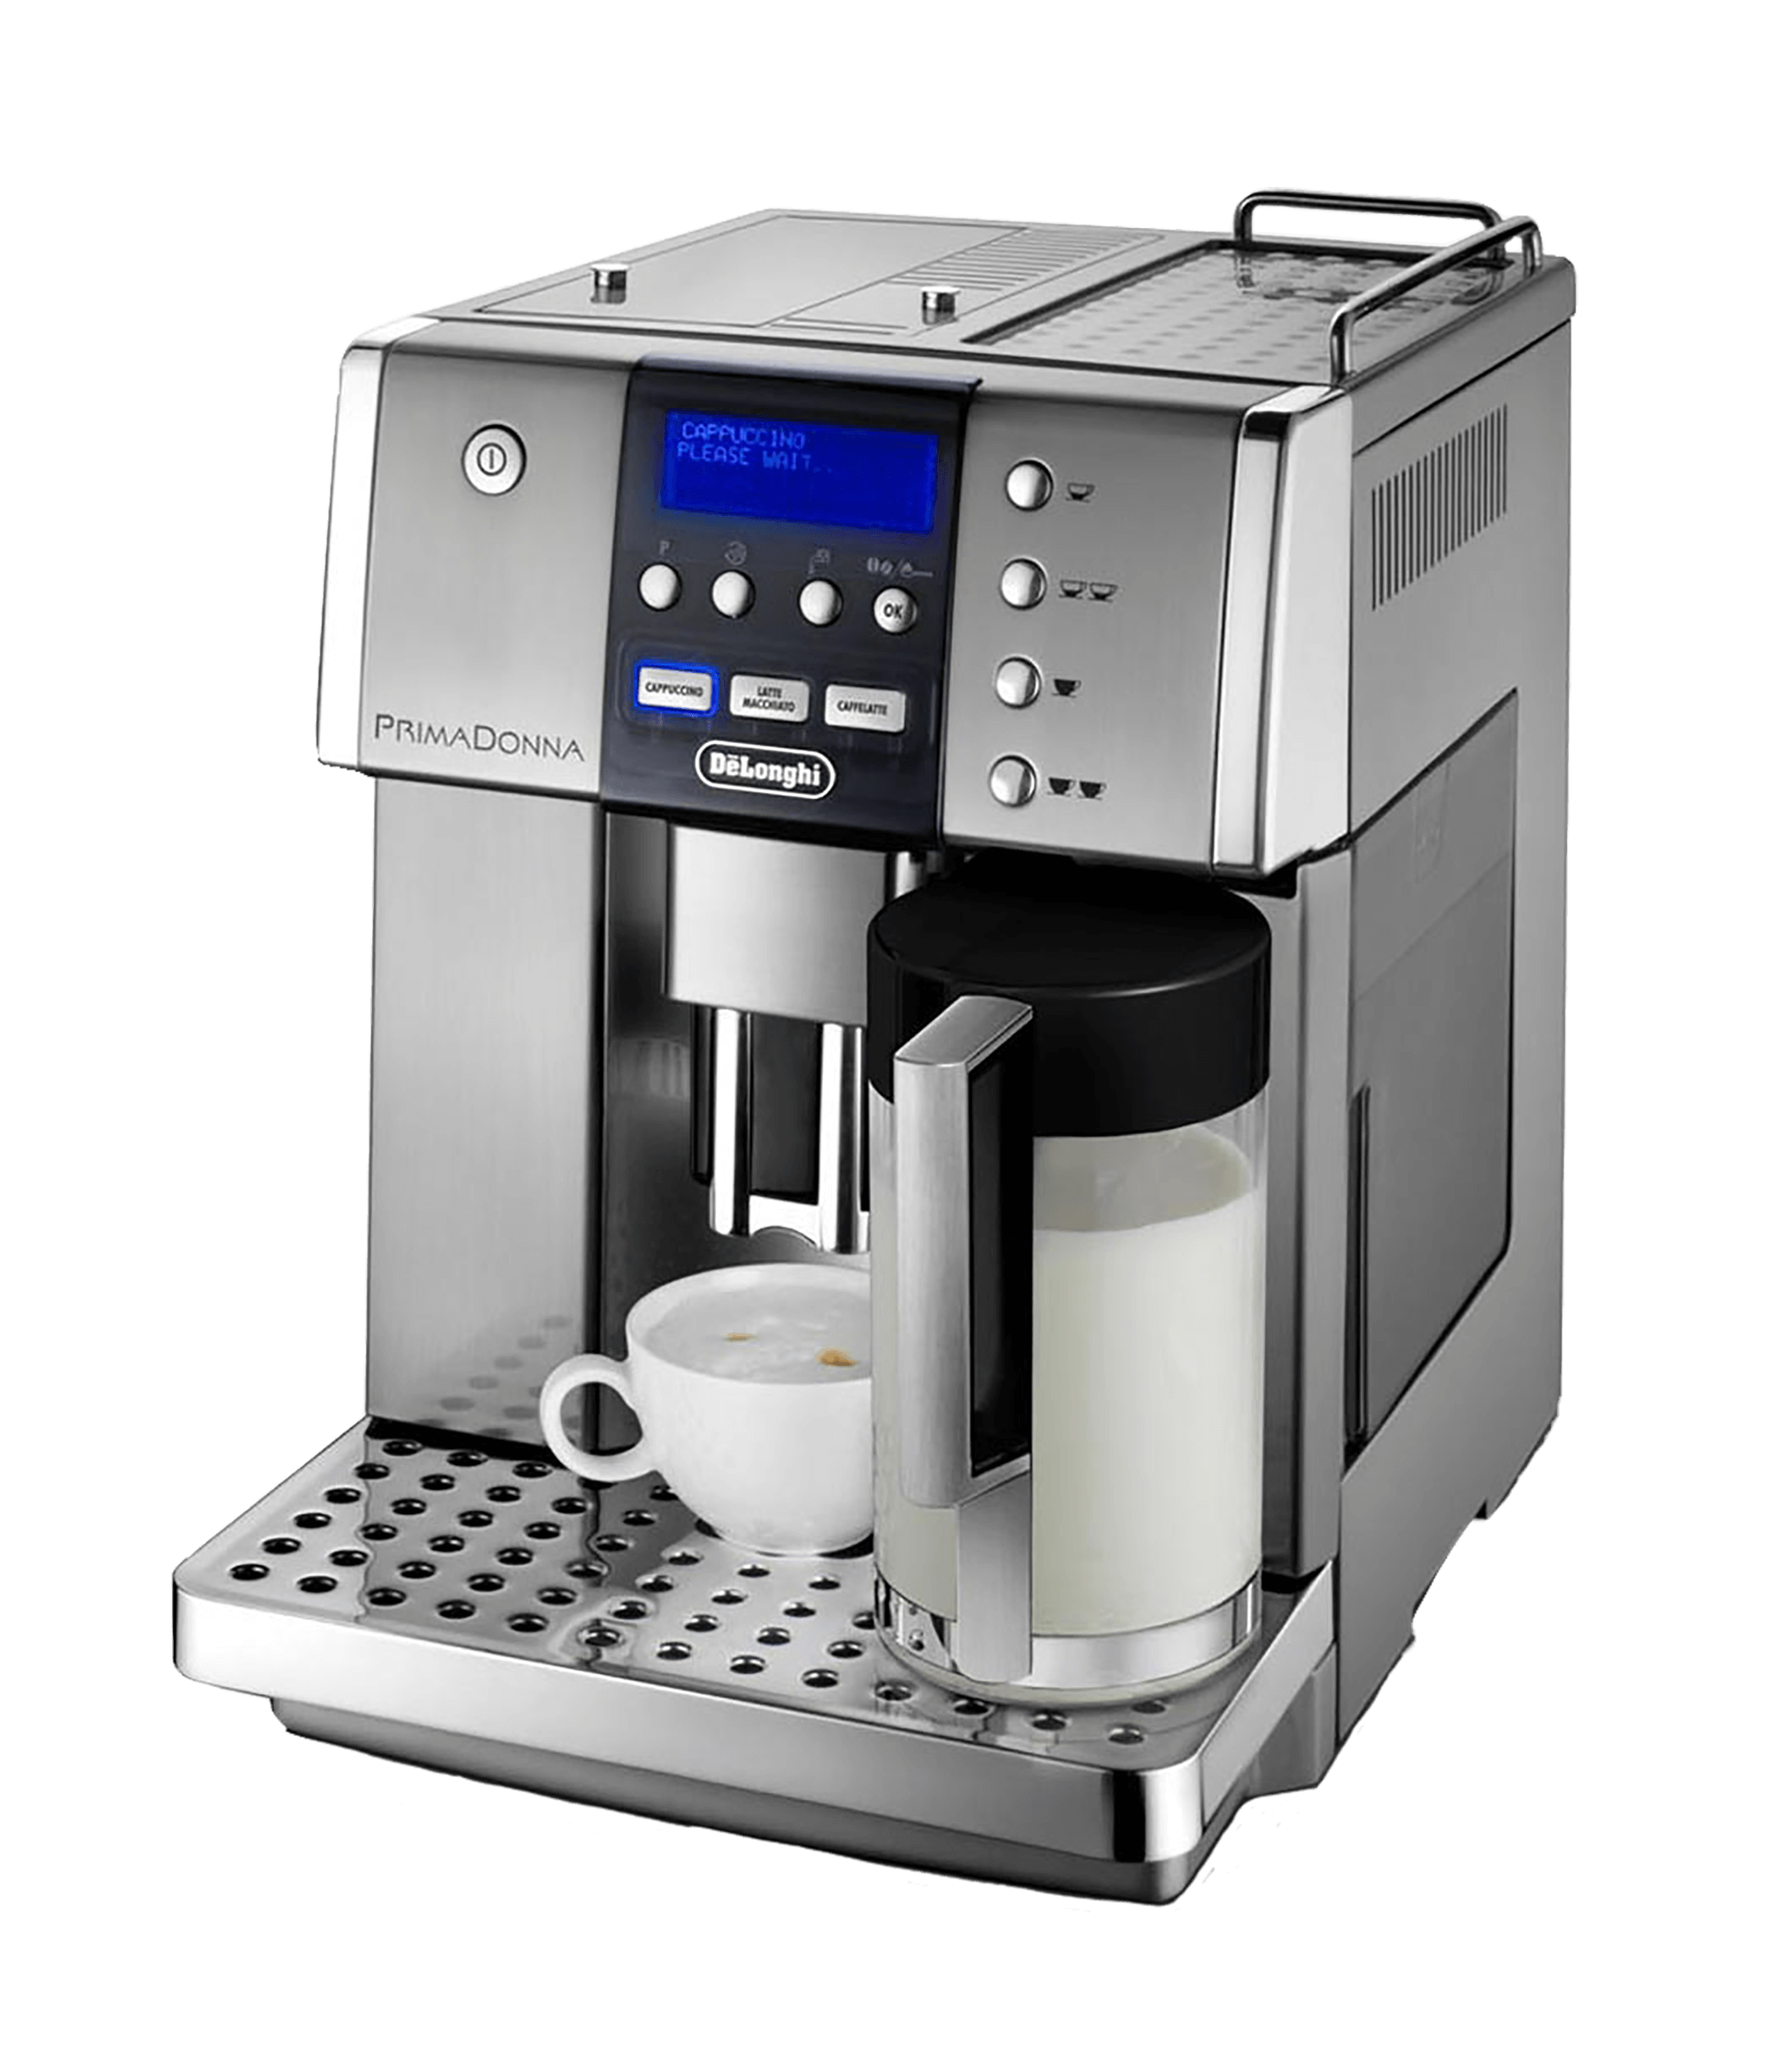 Daily Collection Coffee maker